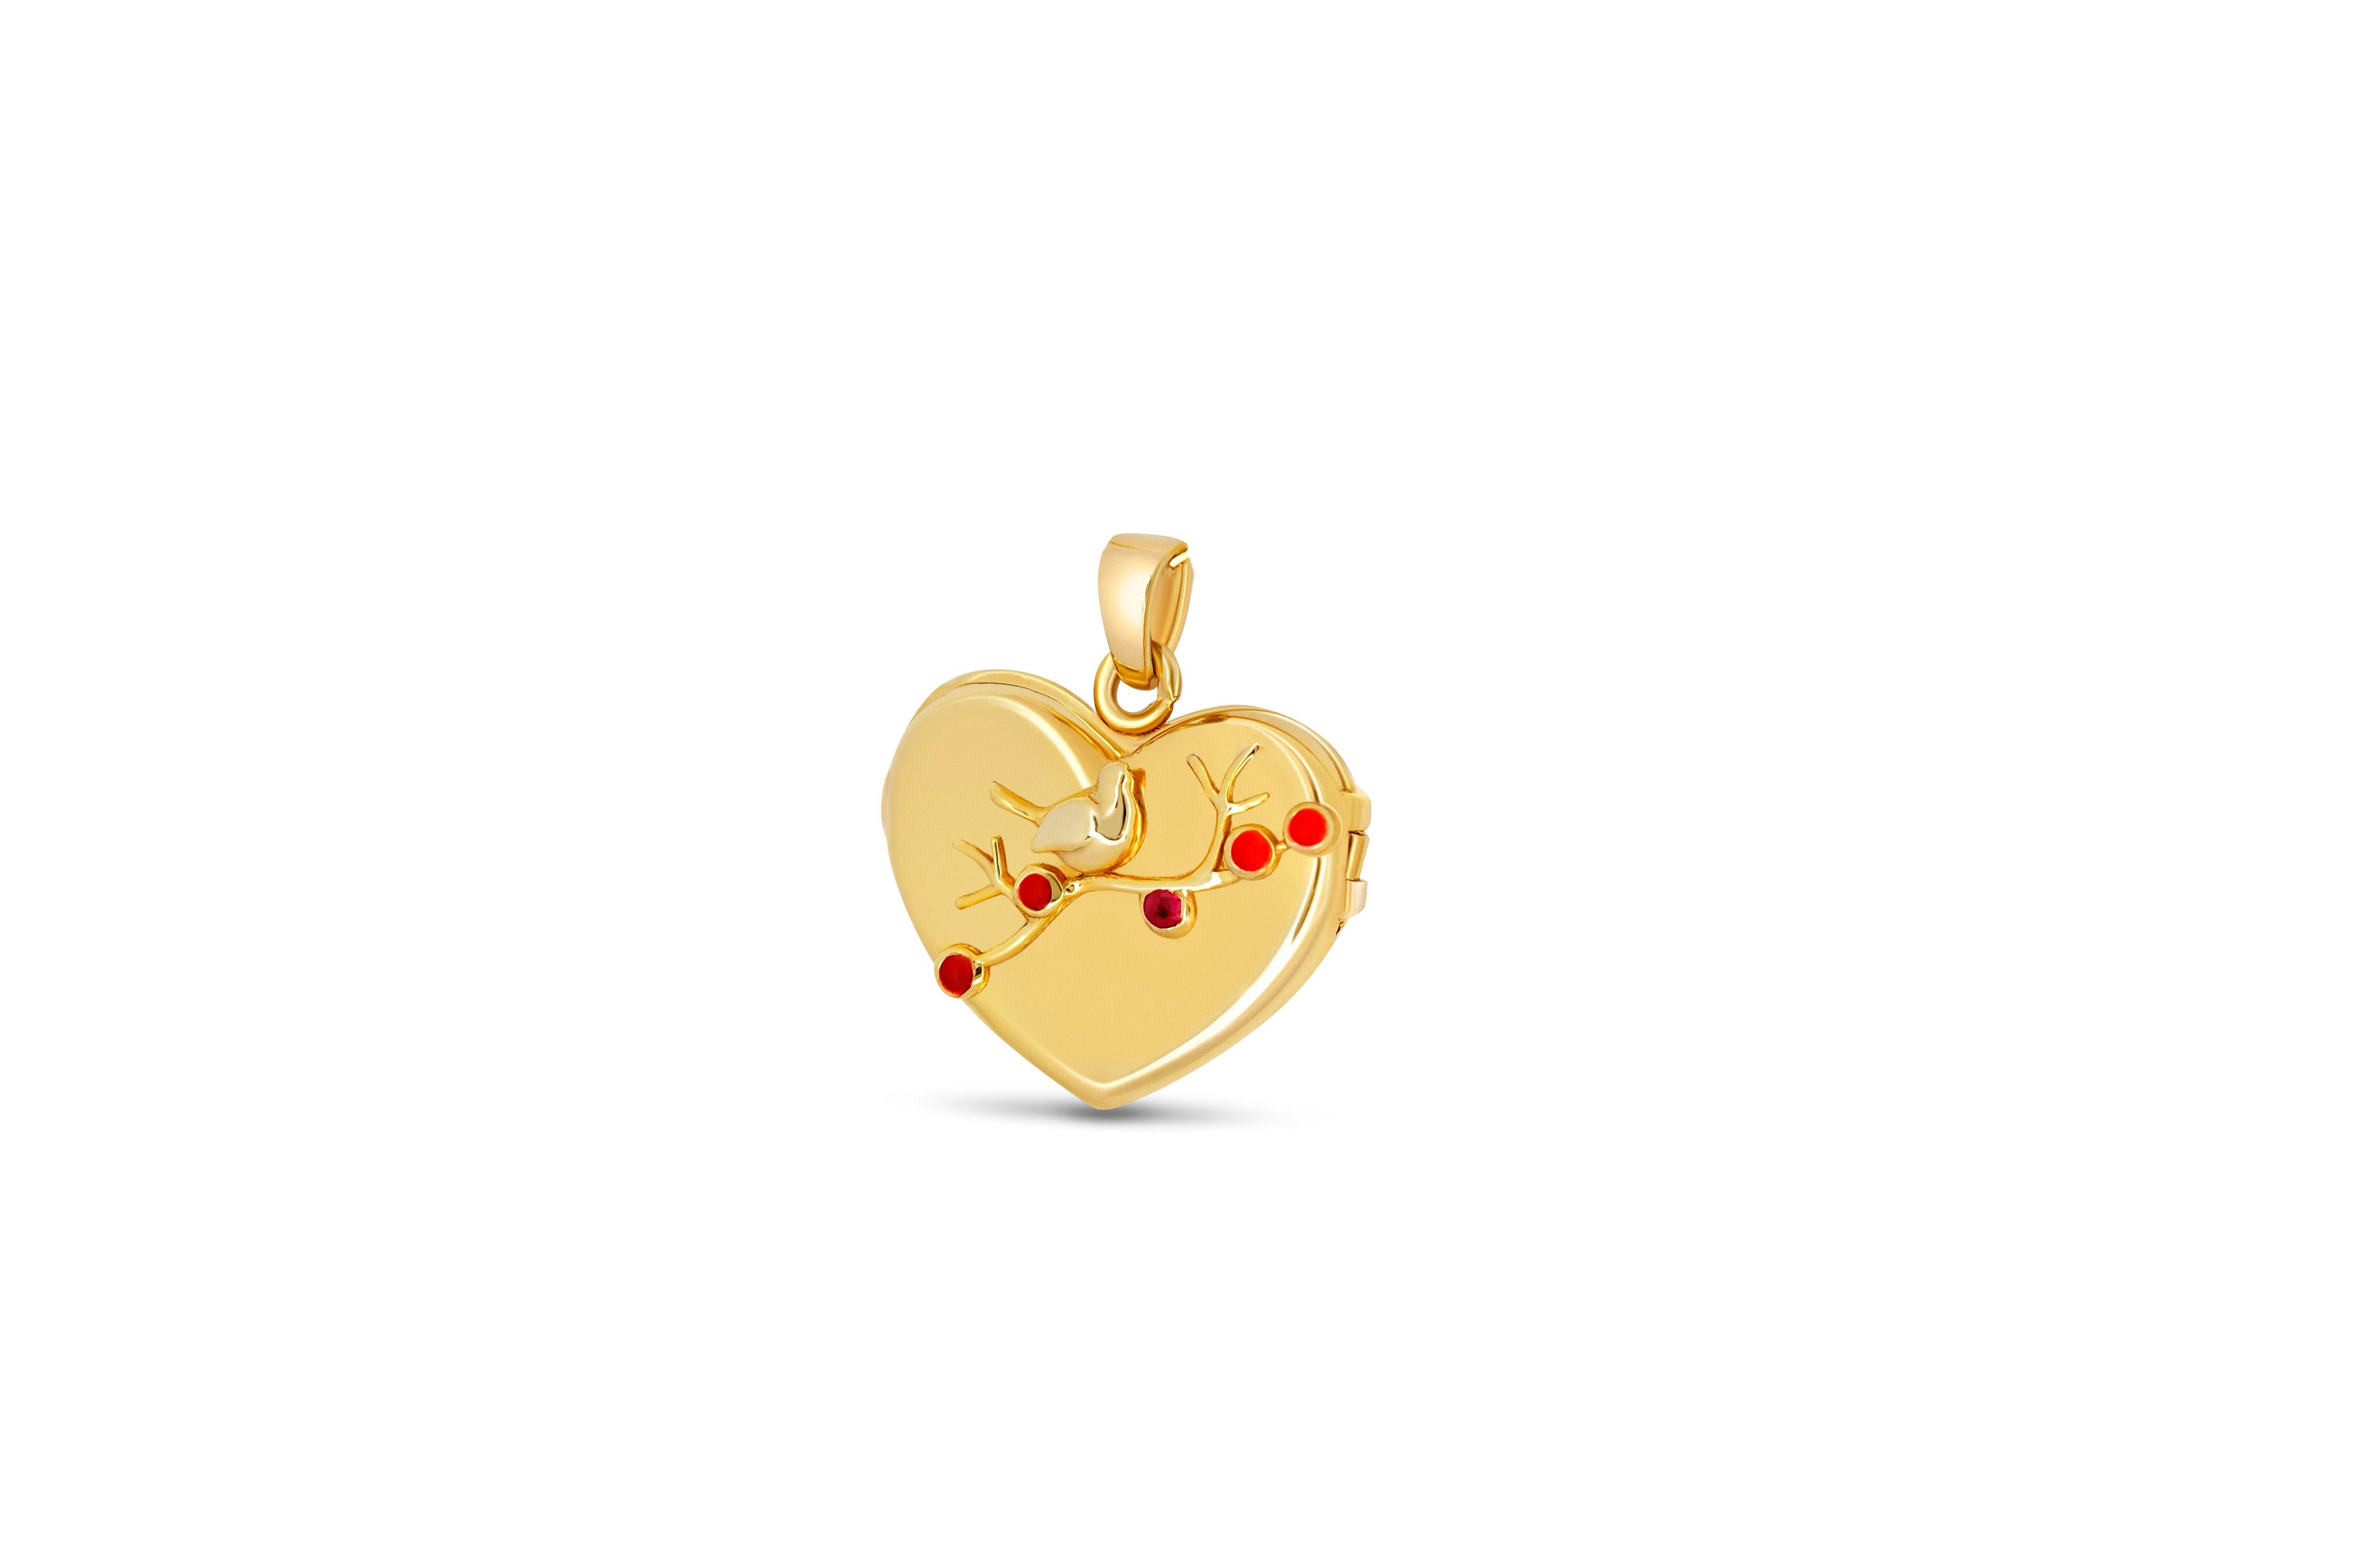 Heart Locket Charm Necklace in 14k gold. Bullfinch on branch with rubies pendant. Heart Locket Necklace For Photo. Heart Locket that Opens. Gift for MOM in 14k gold. Bird pendant necklace.  Picture Gold Necklace Pendant. Art Nouveau, Vintage style